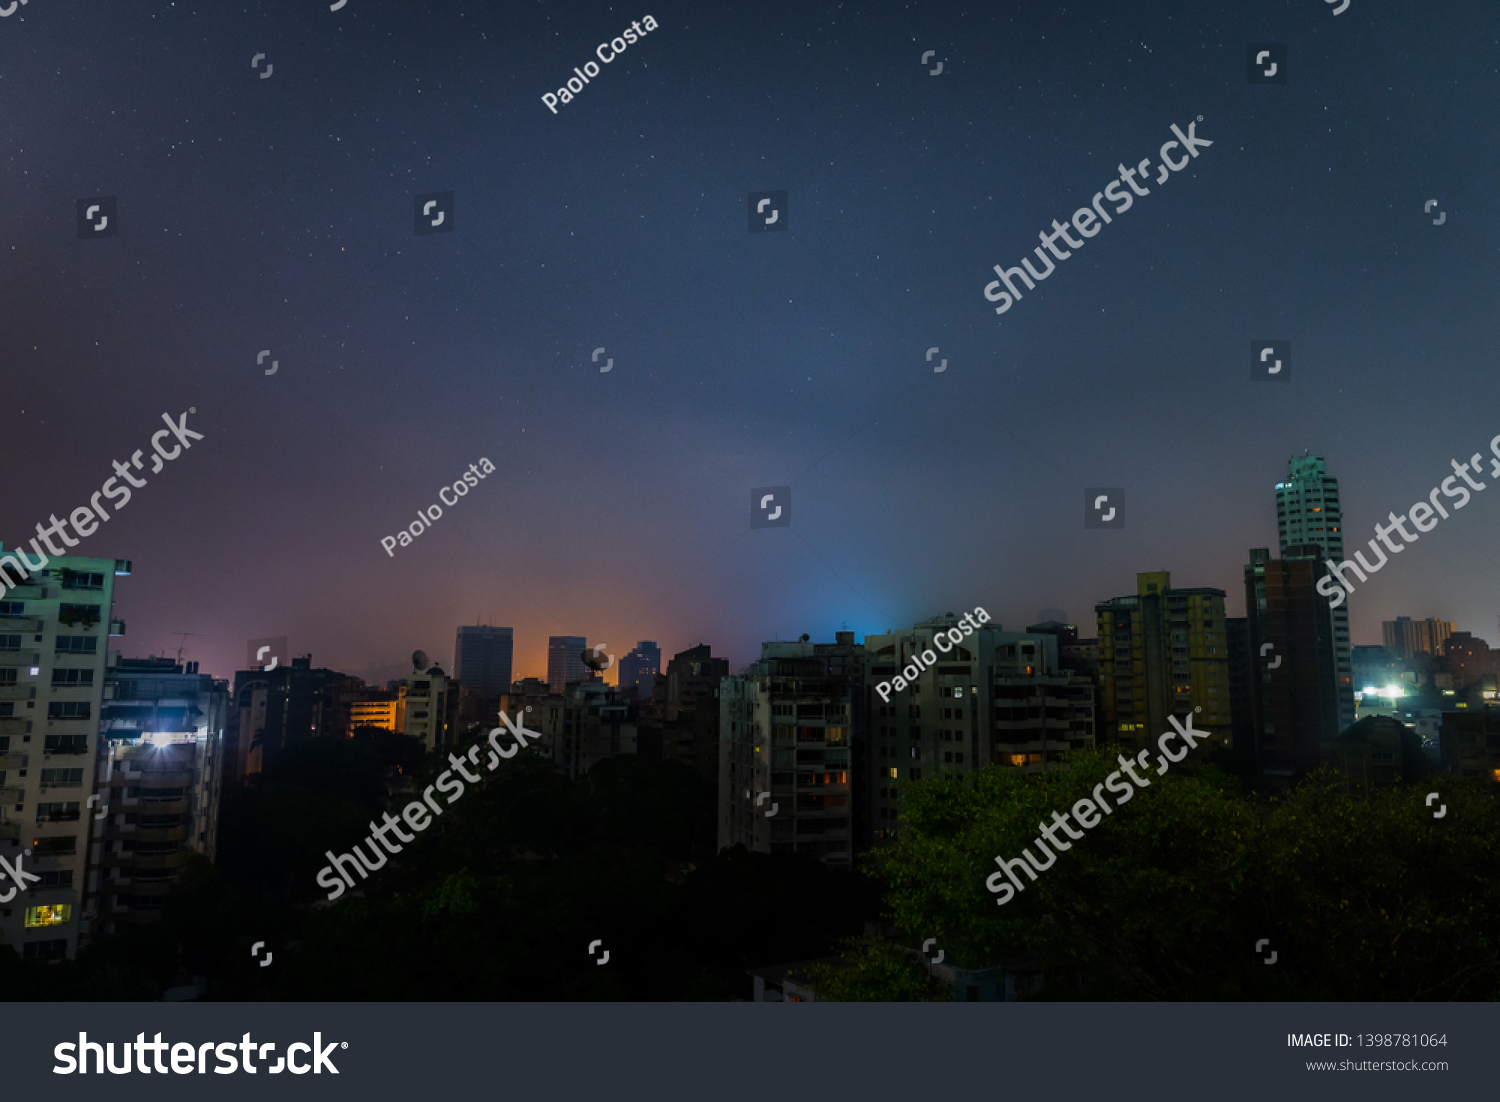 Night view of Caracas, Venezuela's capital, during a national power outage in march, 2019 #1398781064